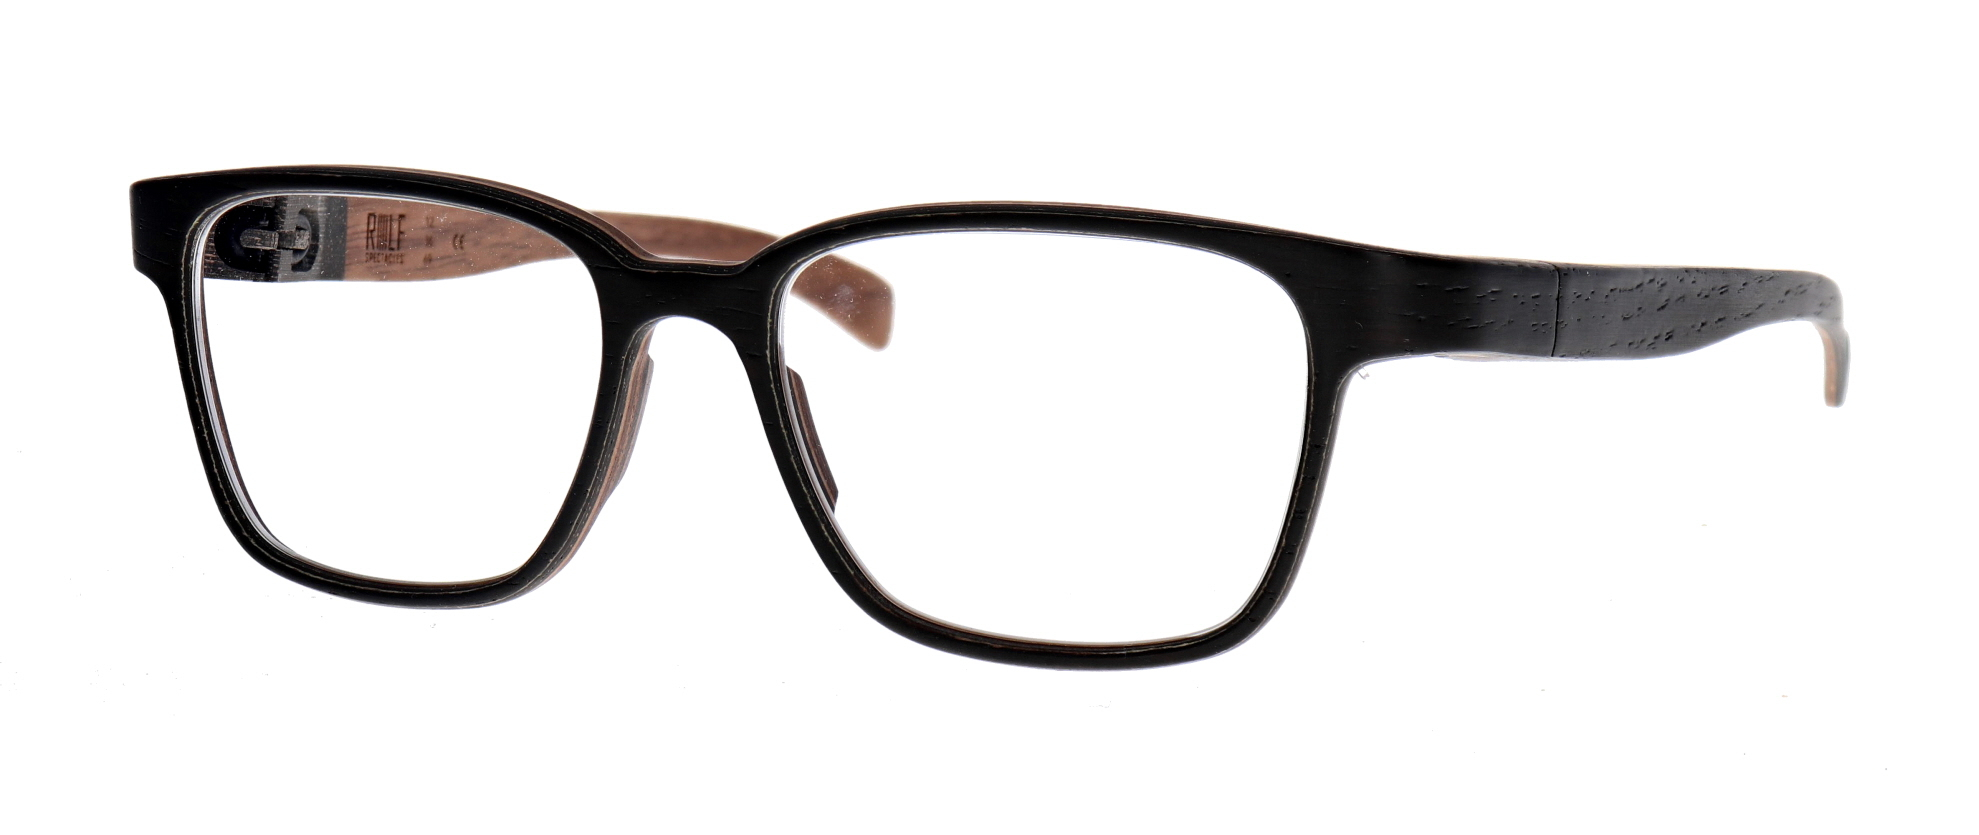 Rolf Spectacles Facel